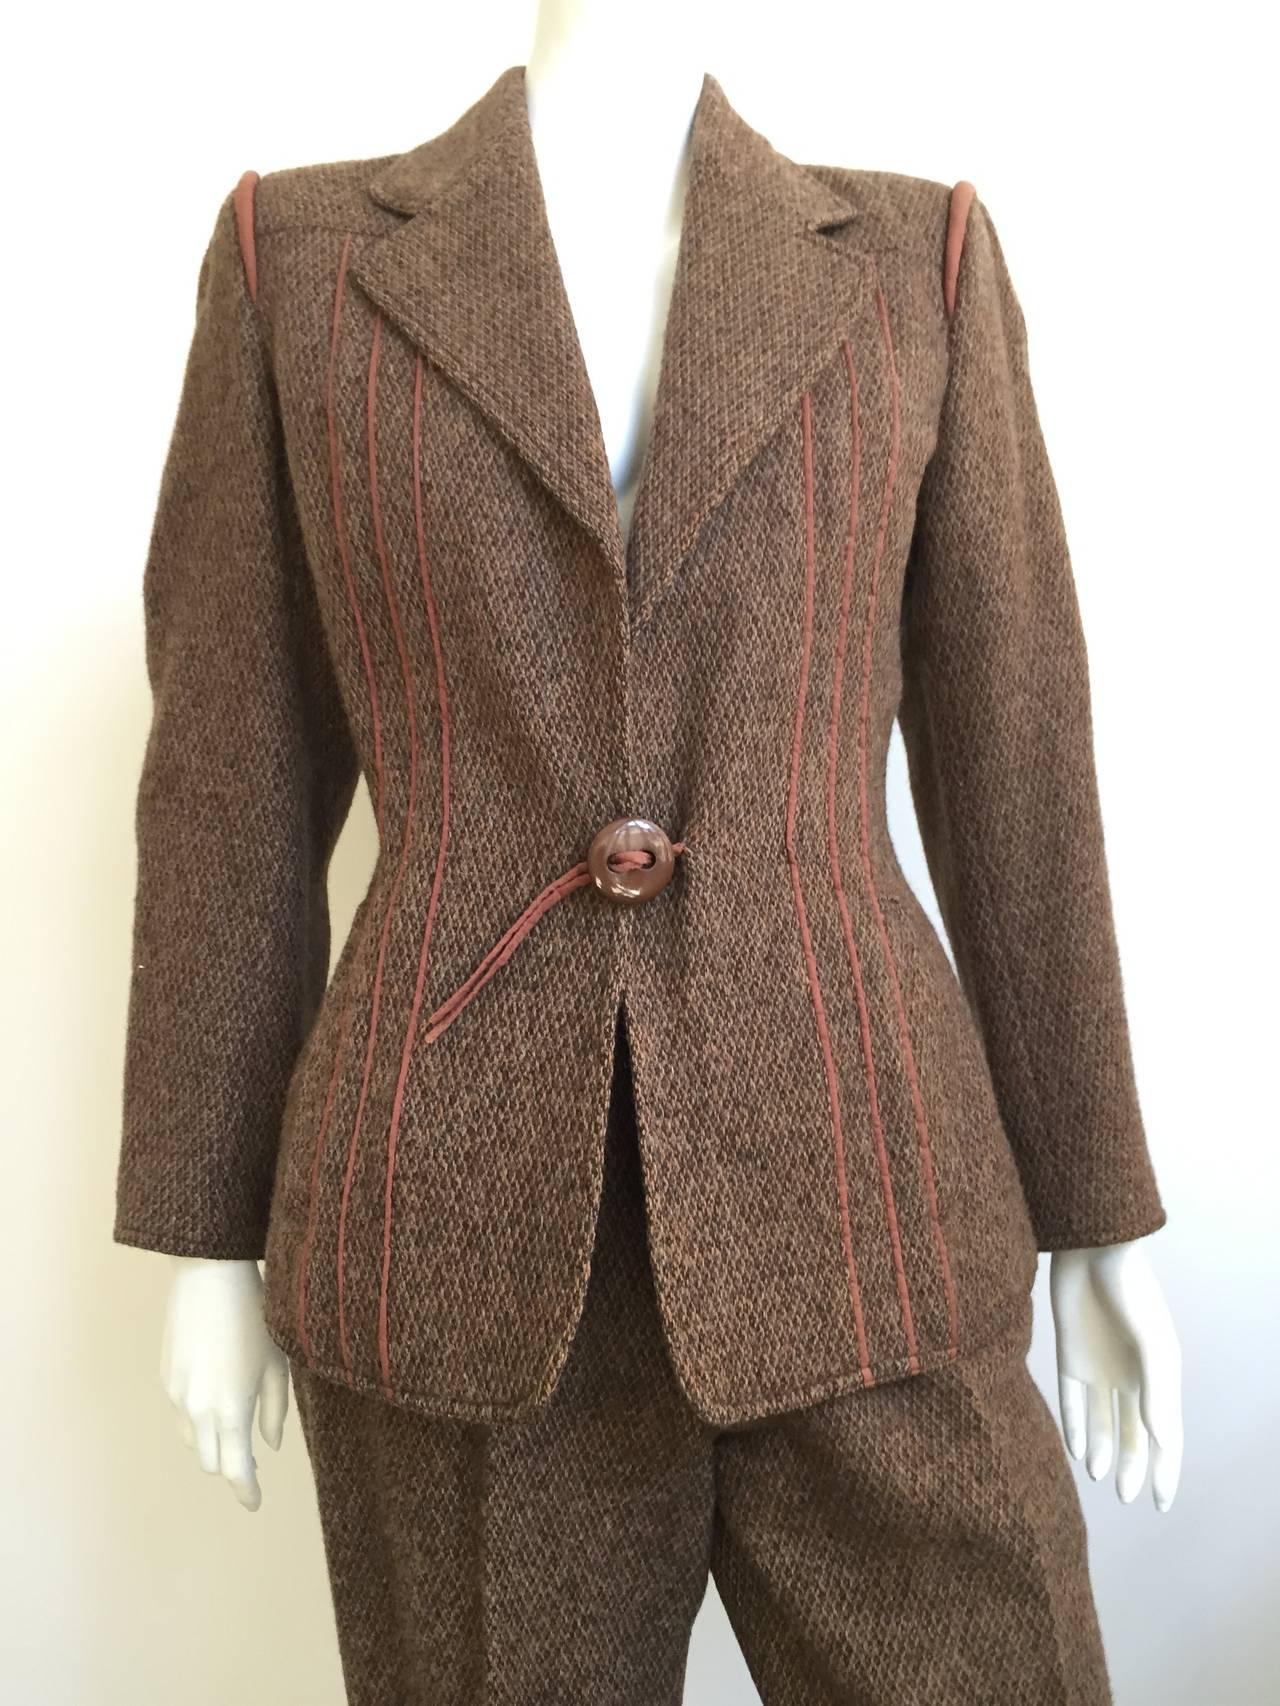 Fendi by Karl Lagerfeld for Stanley Korshak 1980s brown tweed jacket & pants is a USA size 6 ( Please see & use the measurements below so that you can properly measure your body so that you know Karl would approve). Single brown button ties jacket